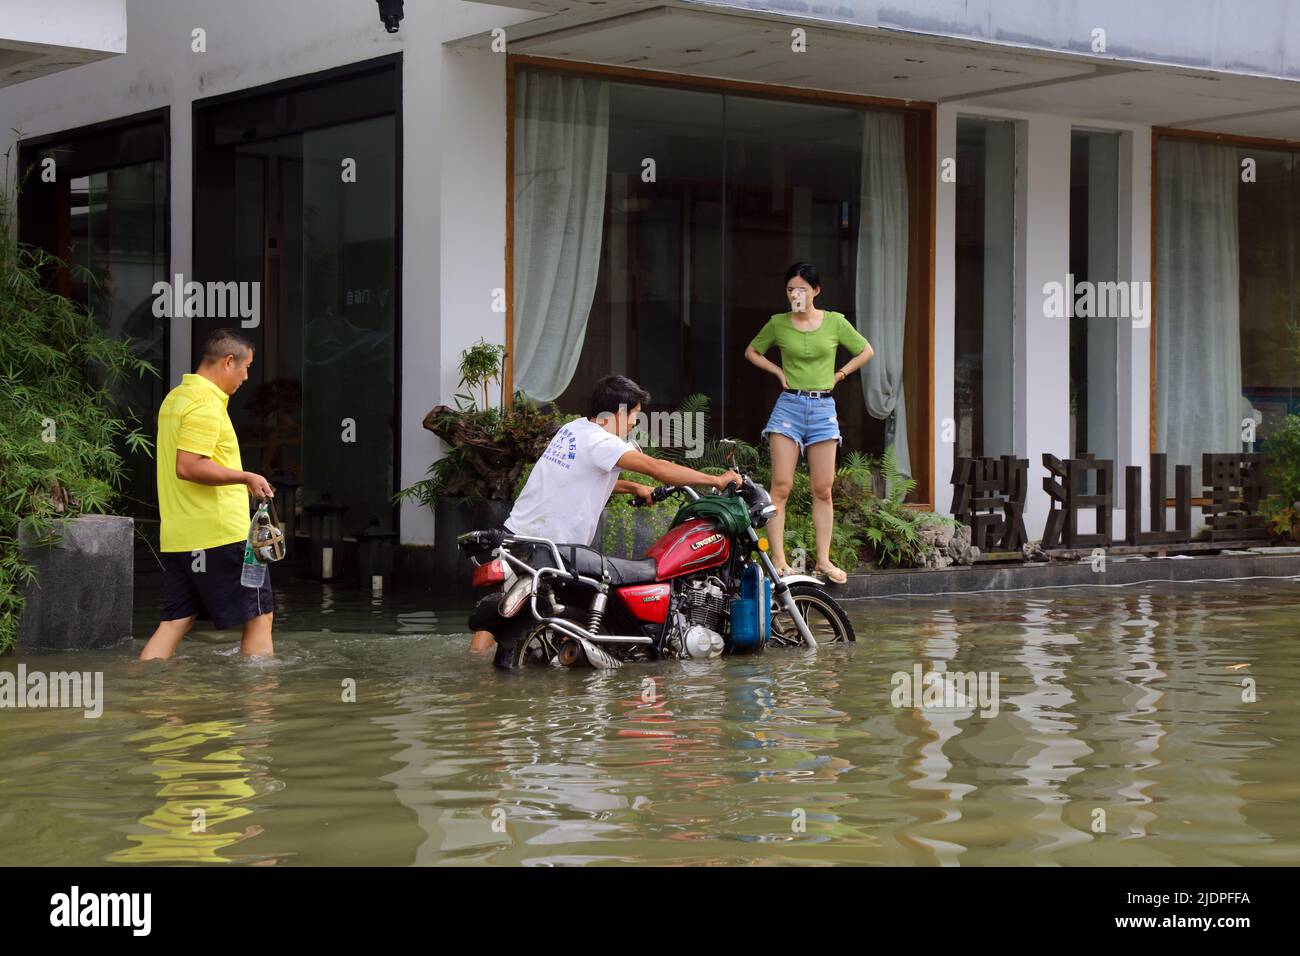 GUILIN, CHINA - JUNE 22, 2022 - Flood waters inundate a street in Guilin, Guangxi Province, China, June 22, 2022. Stock Photo